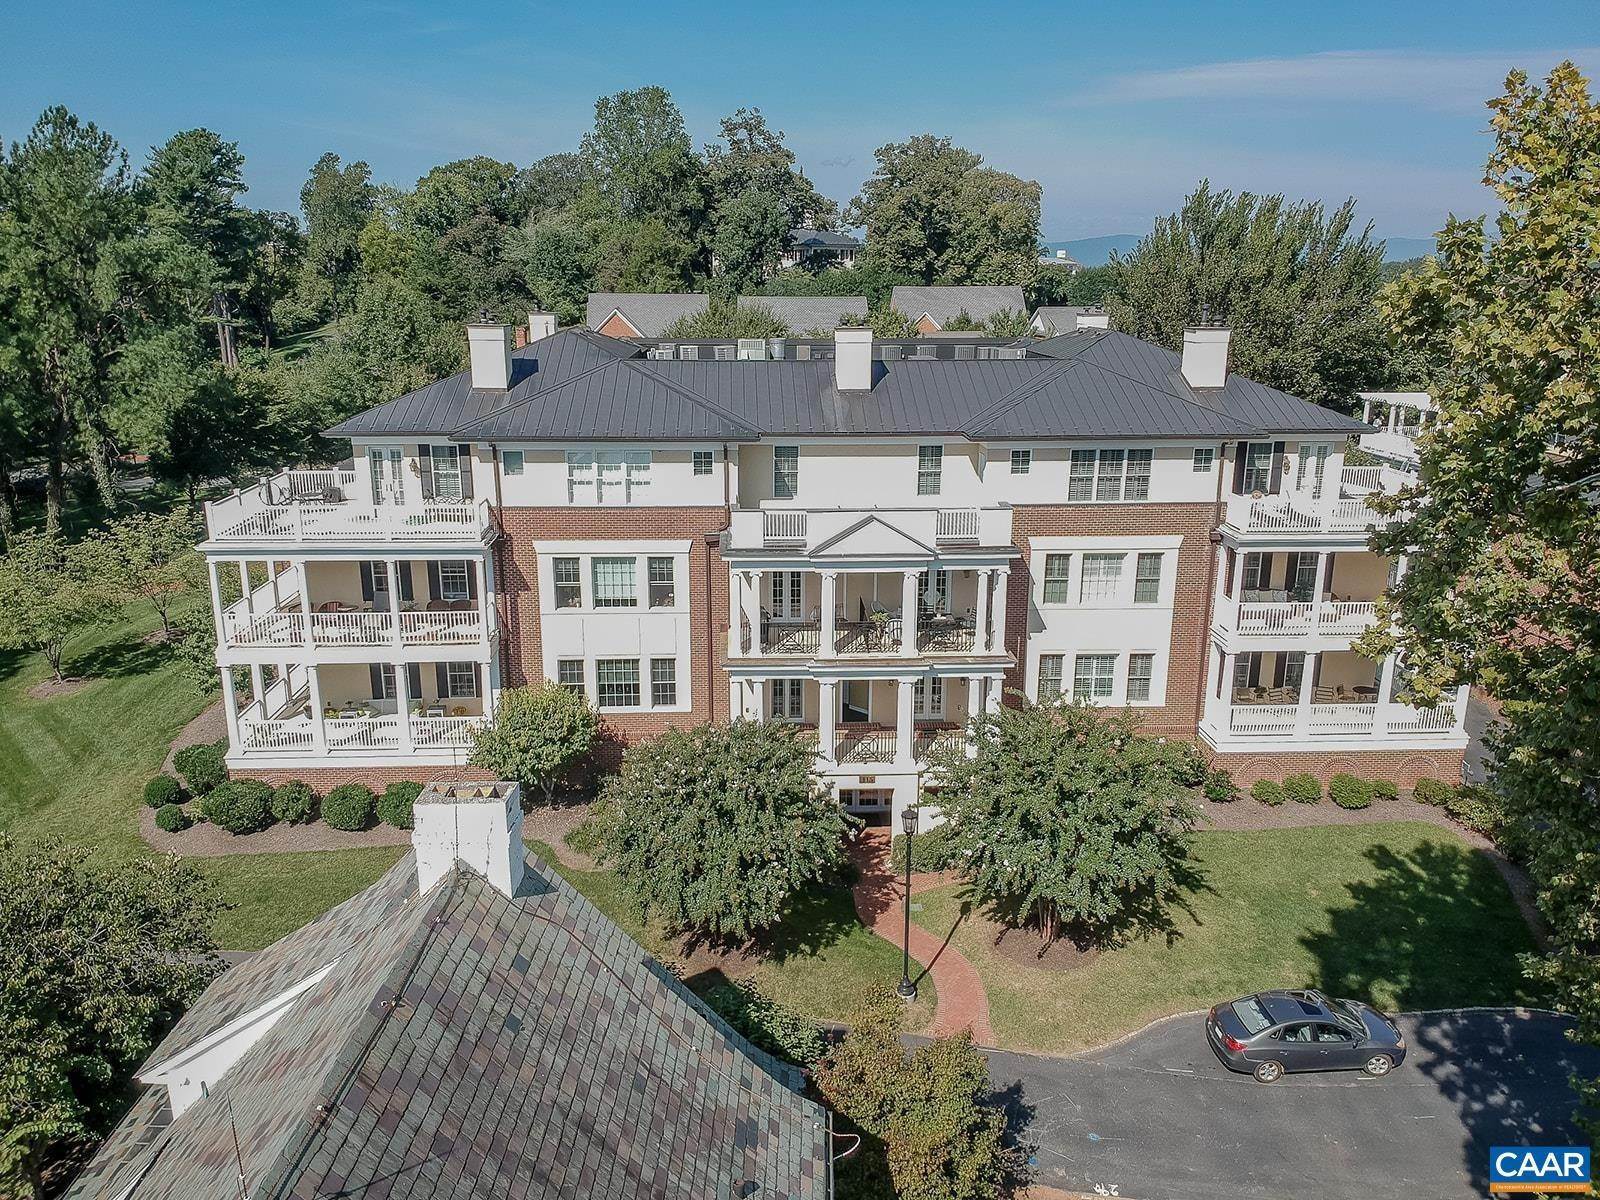 44. Condominiums for Sale at 415 WHITE GABLES LN #101 Charlottesville, Virginia 22903 United States